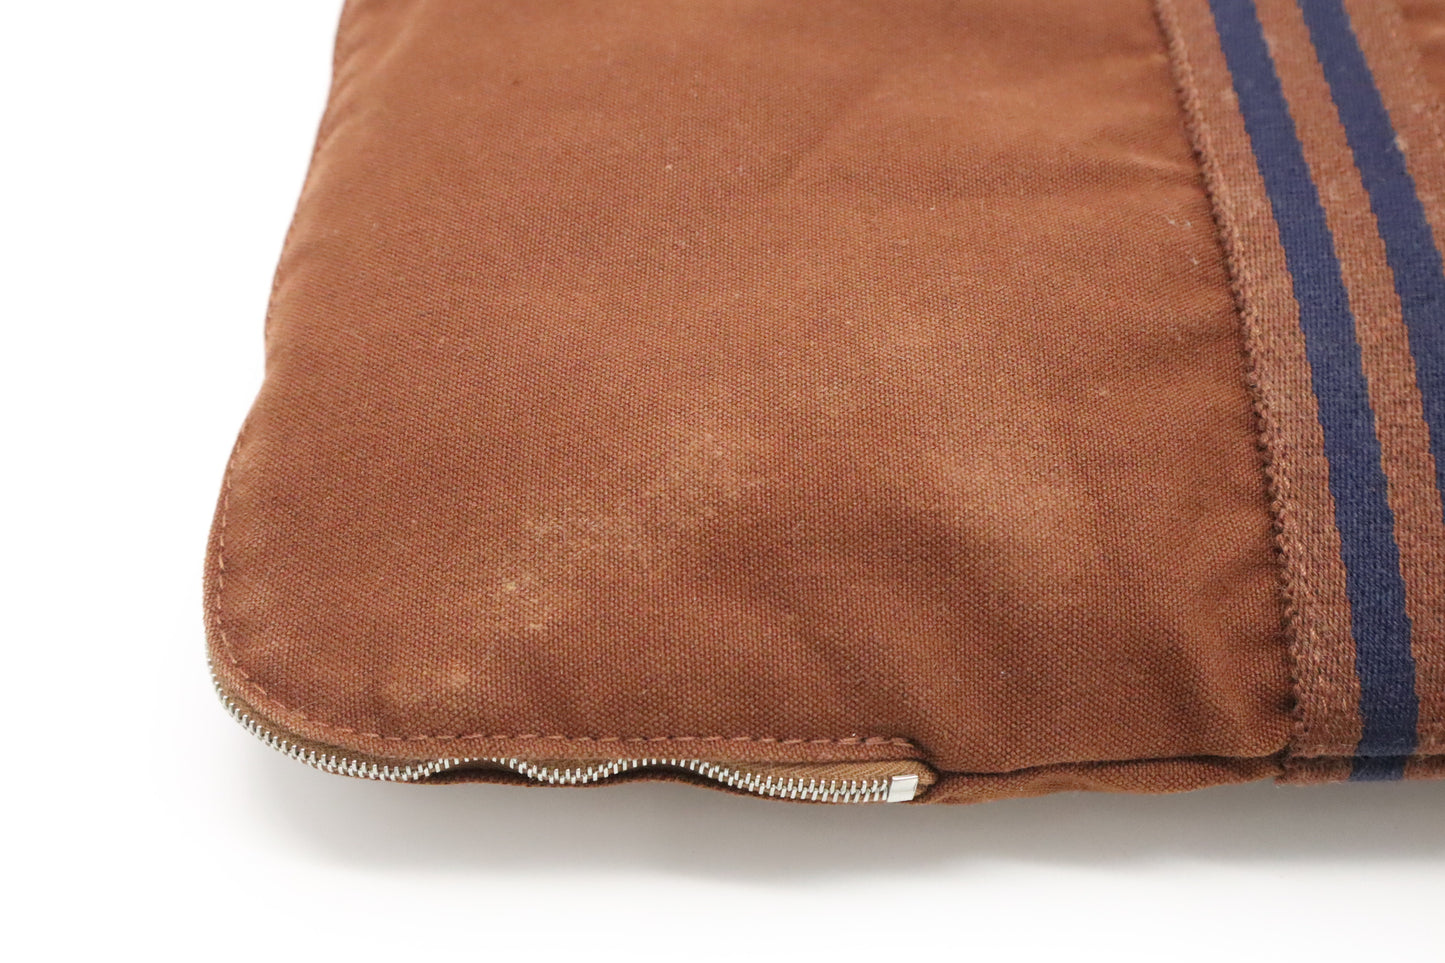 Hermes Porte-Document in Brown Canvas